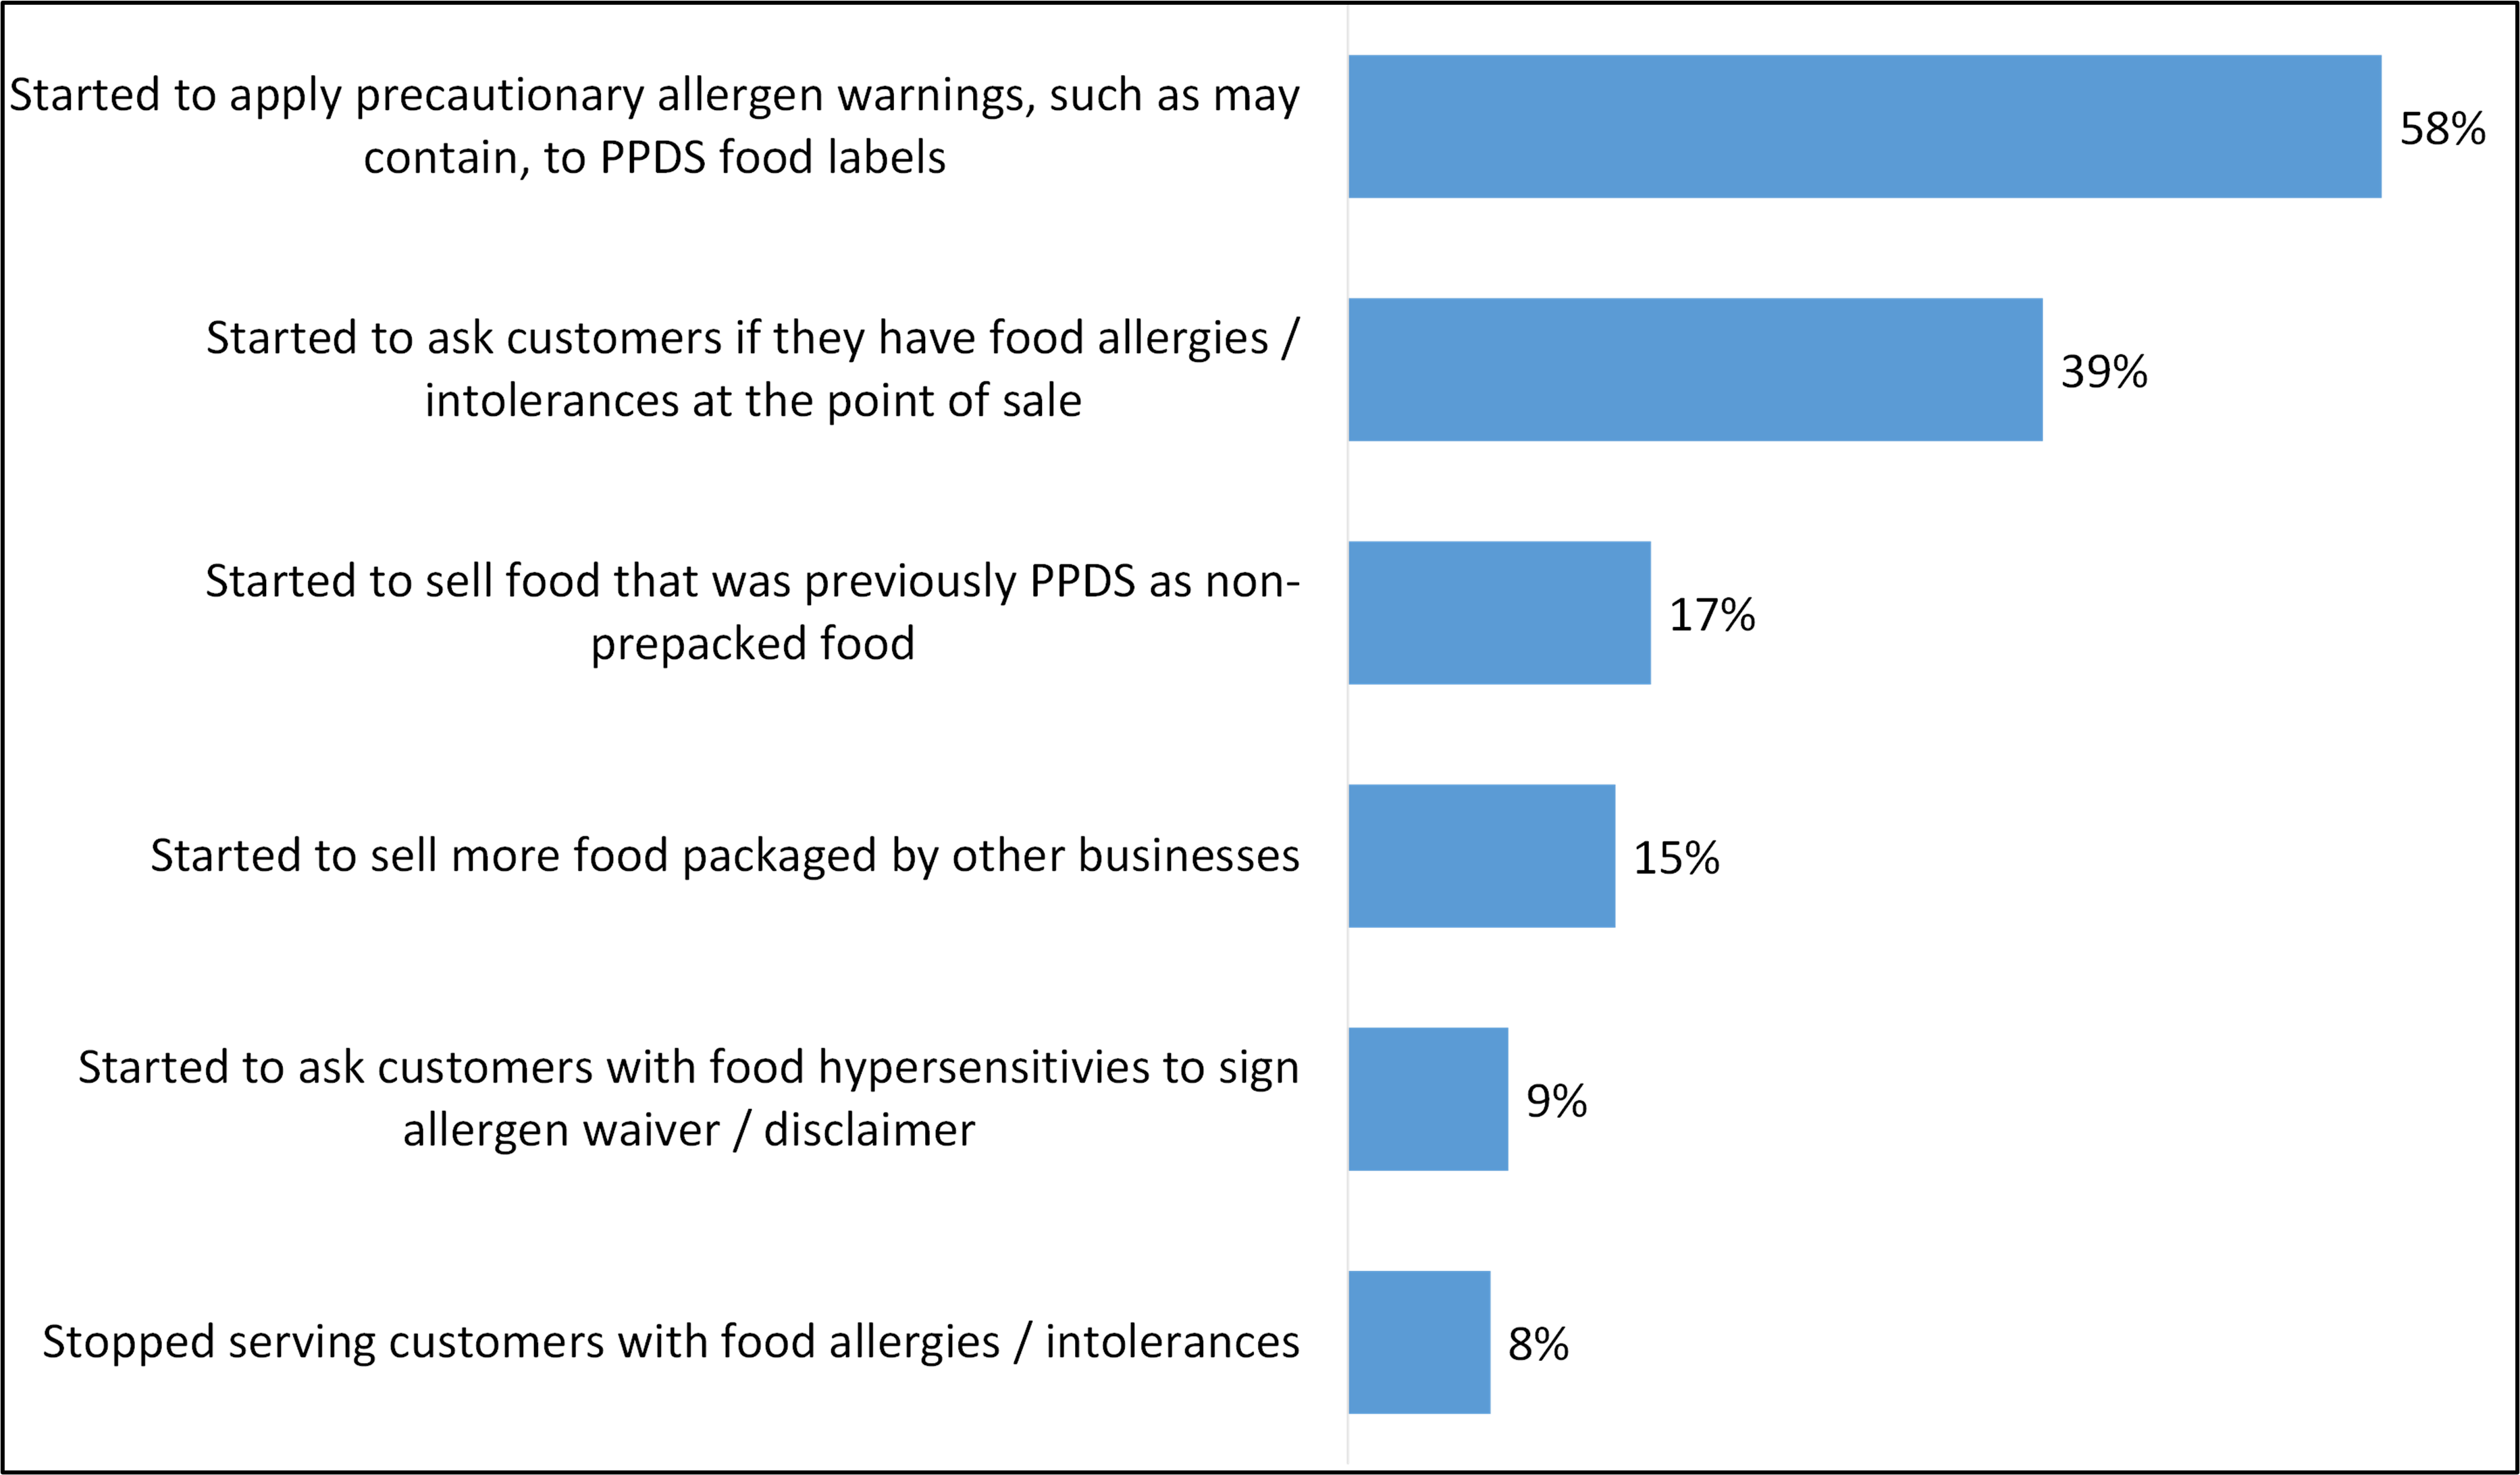 Bar chart showing Food Business Operators' self-reported changes in business practices since labelling requirements were introduced.